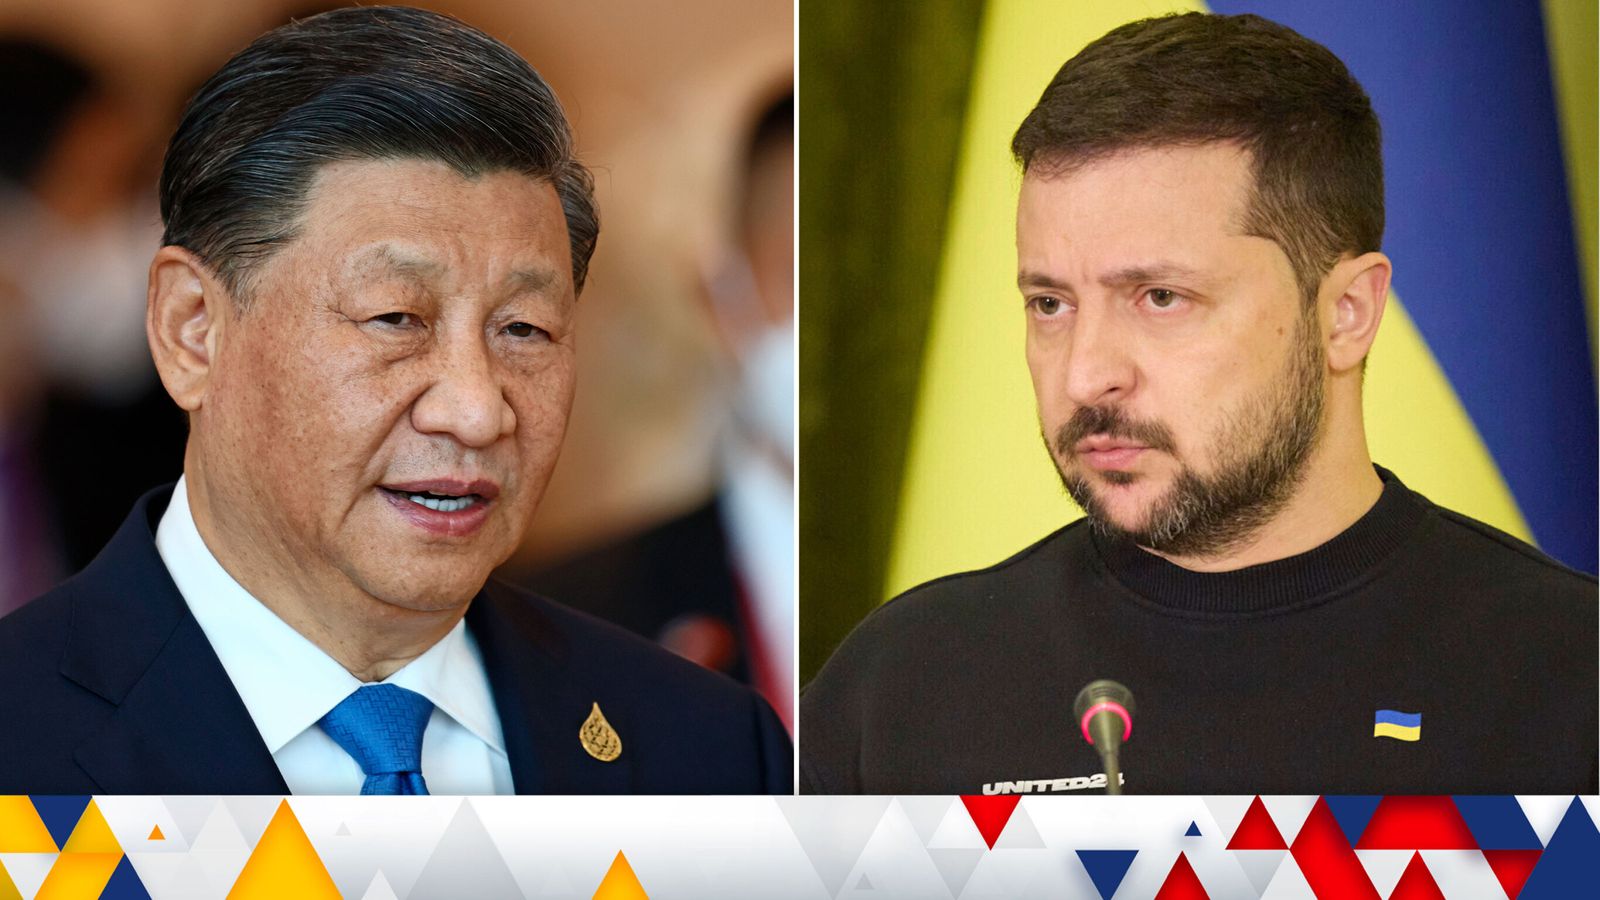 Ukraine war: China's Xi Jinping calls Volodymyr Zelenskyy for first time since Russian invasion of Ukraine